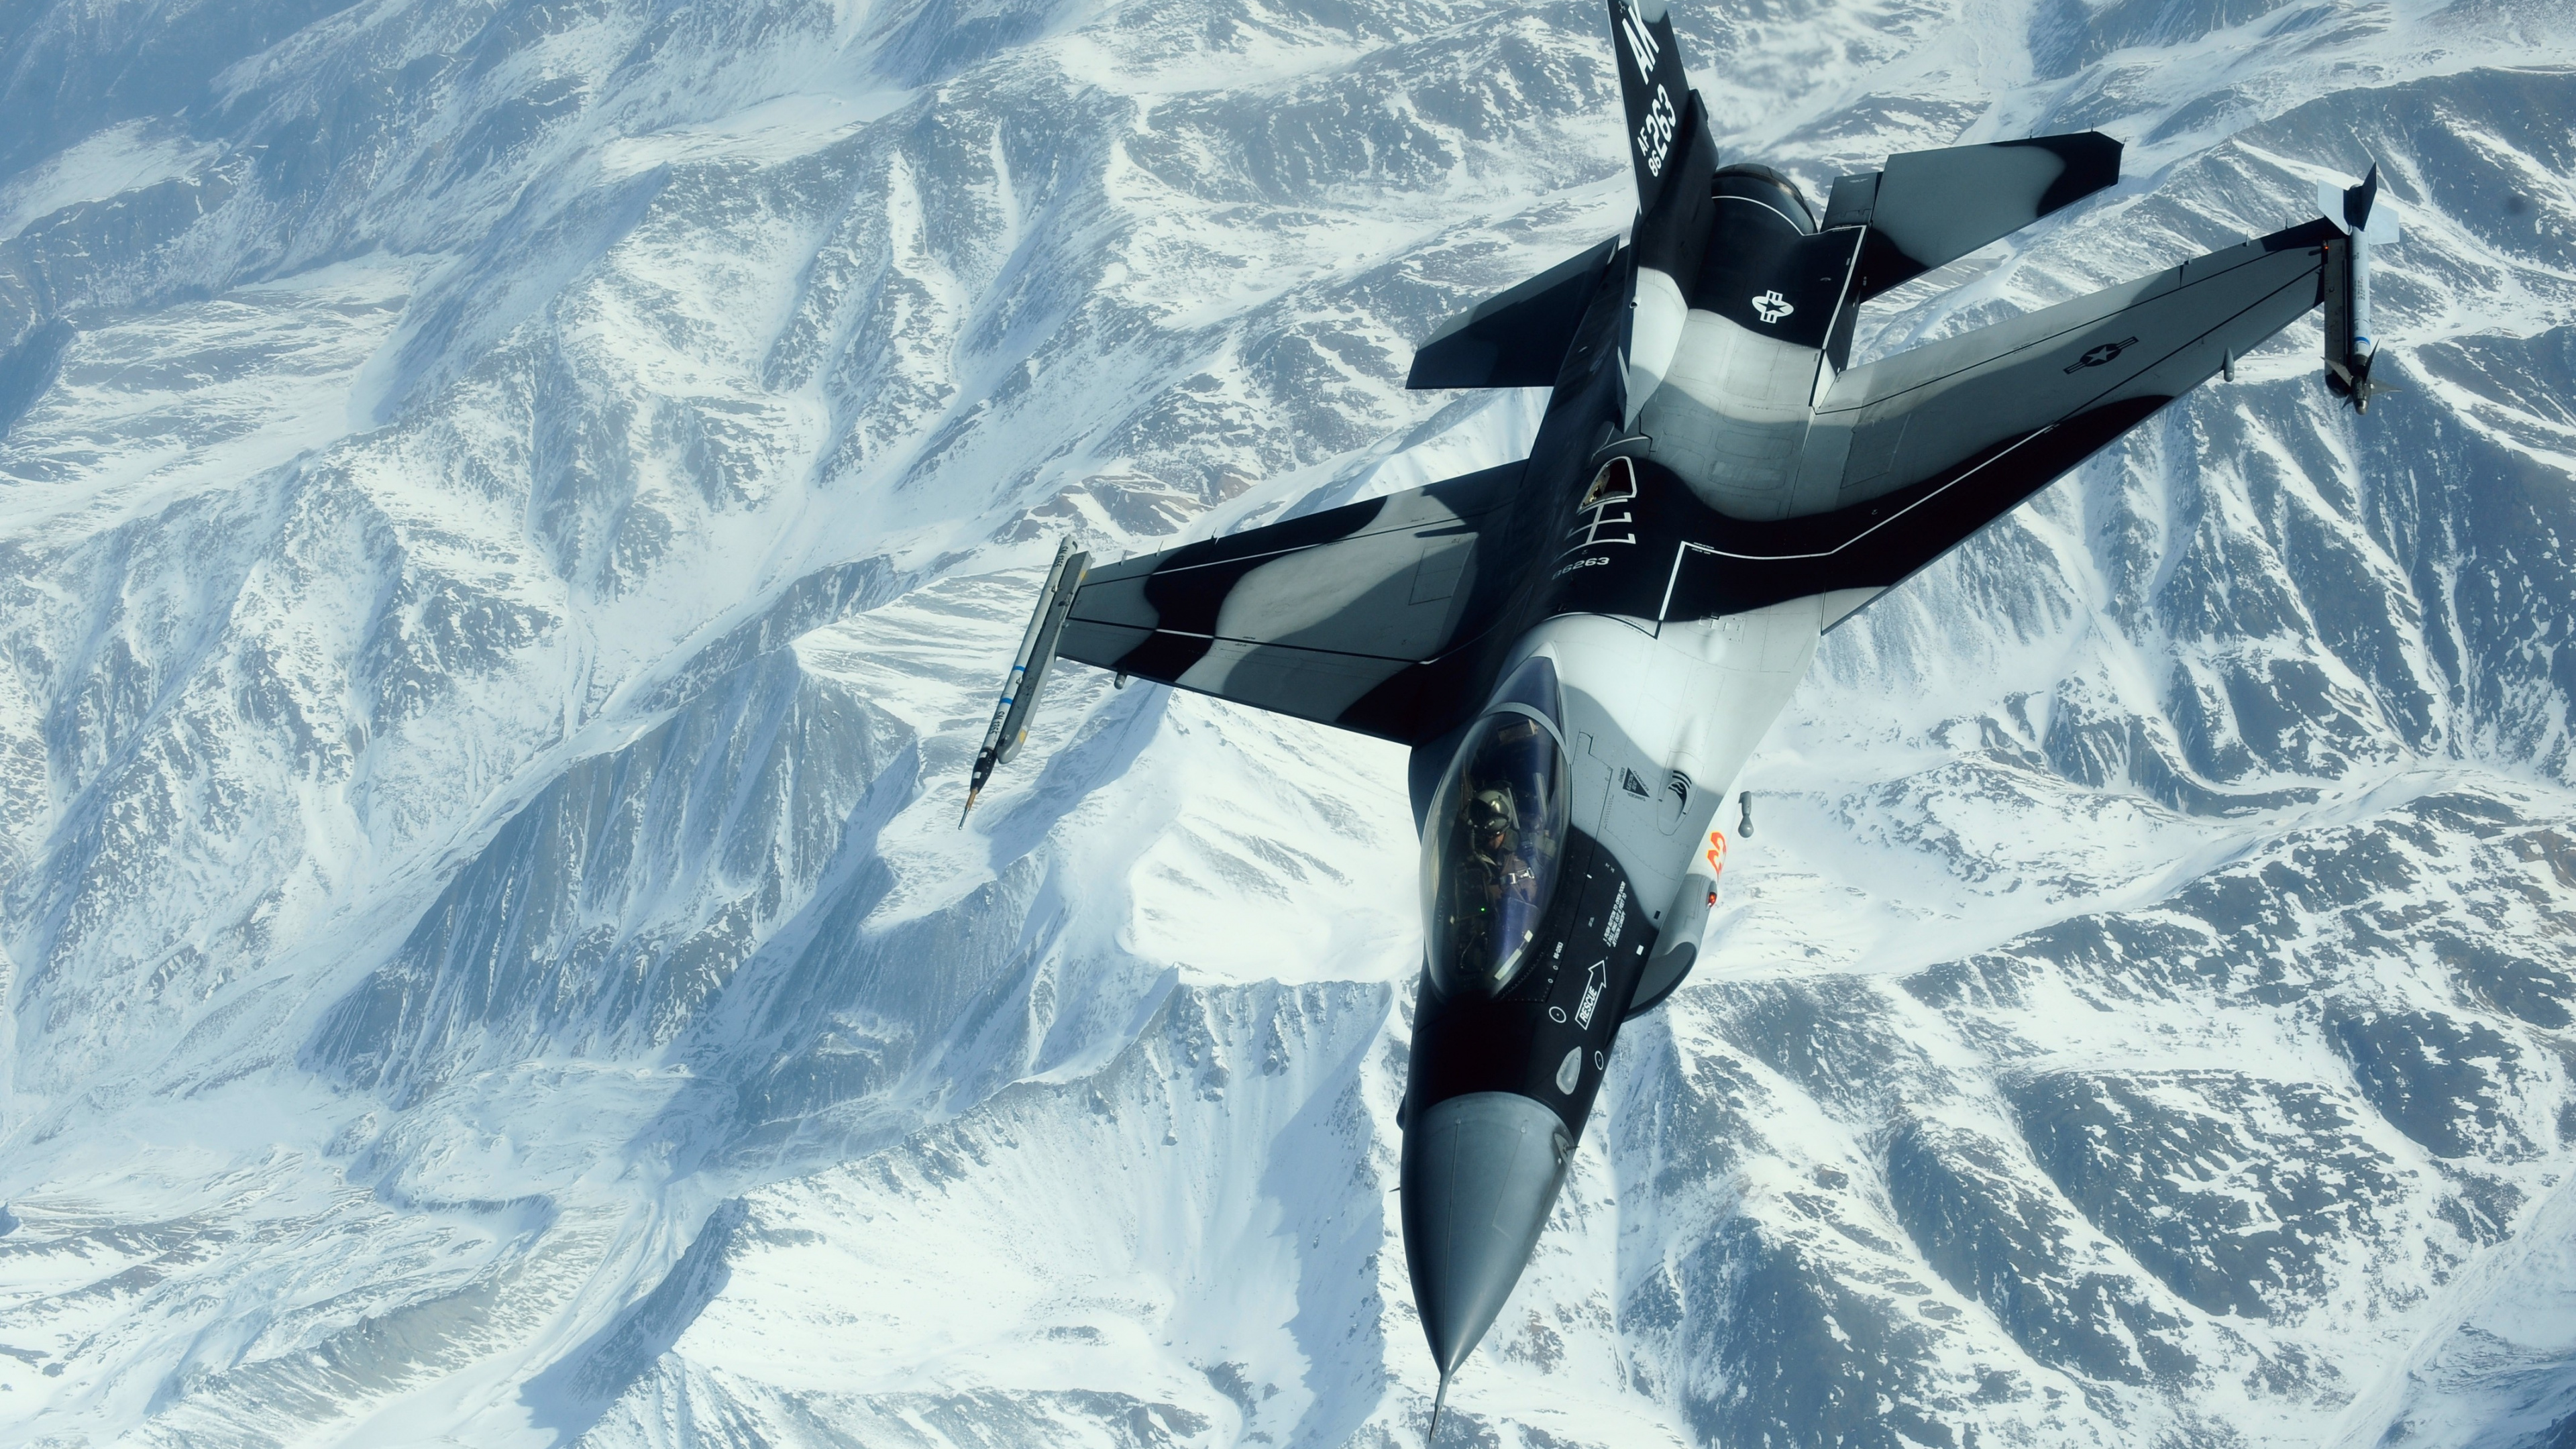 Black and White Jet Plane Flying Over Snow Covered Mountain During Daytime. Wallpaper in 3840x2160 Resolution